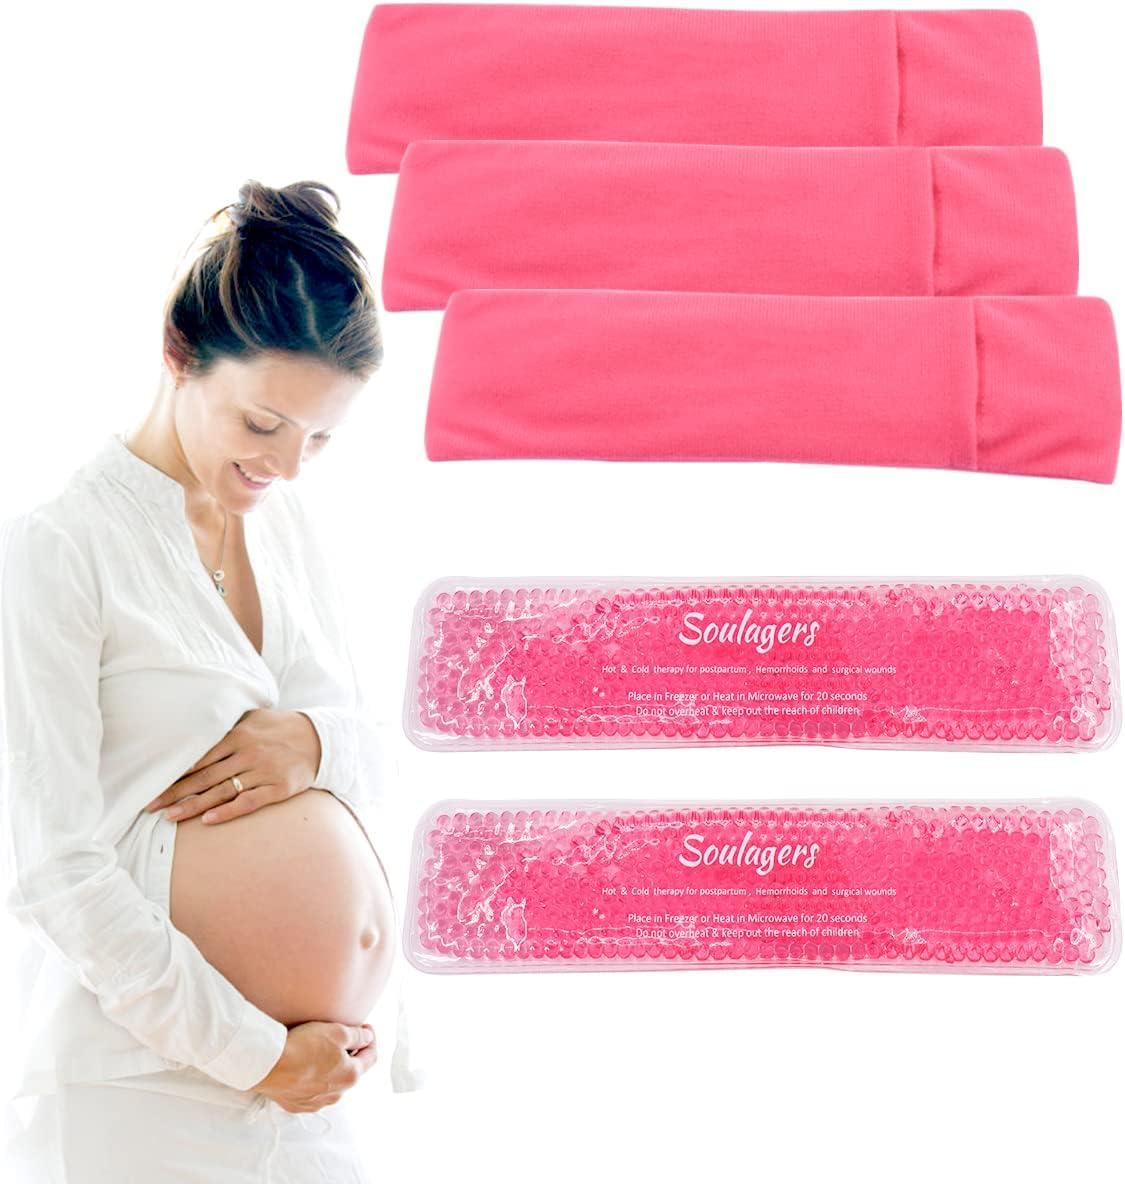 Reusable Perineal Cooling Pad for Postpartum and Hemorrhoid Pain